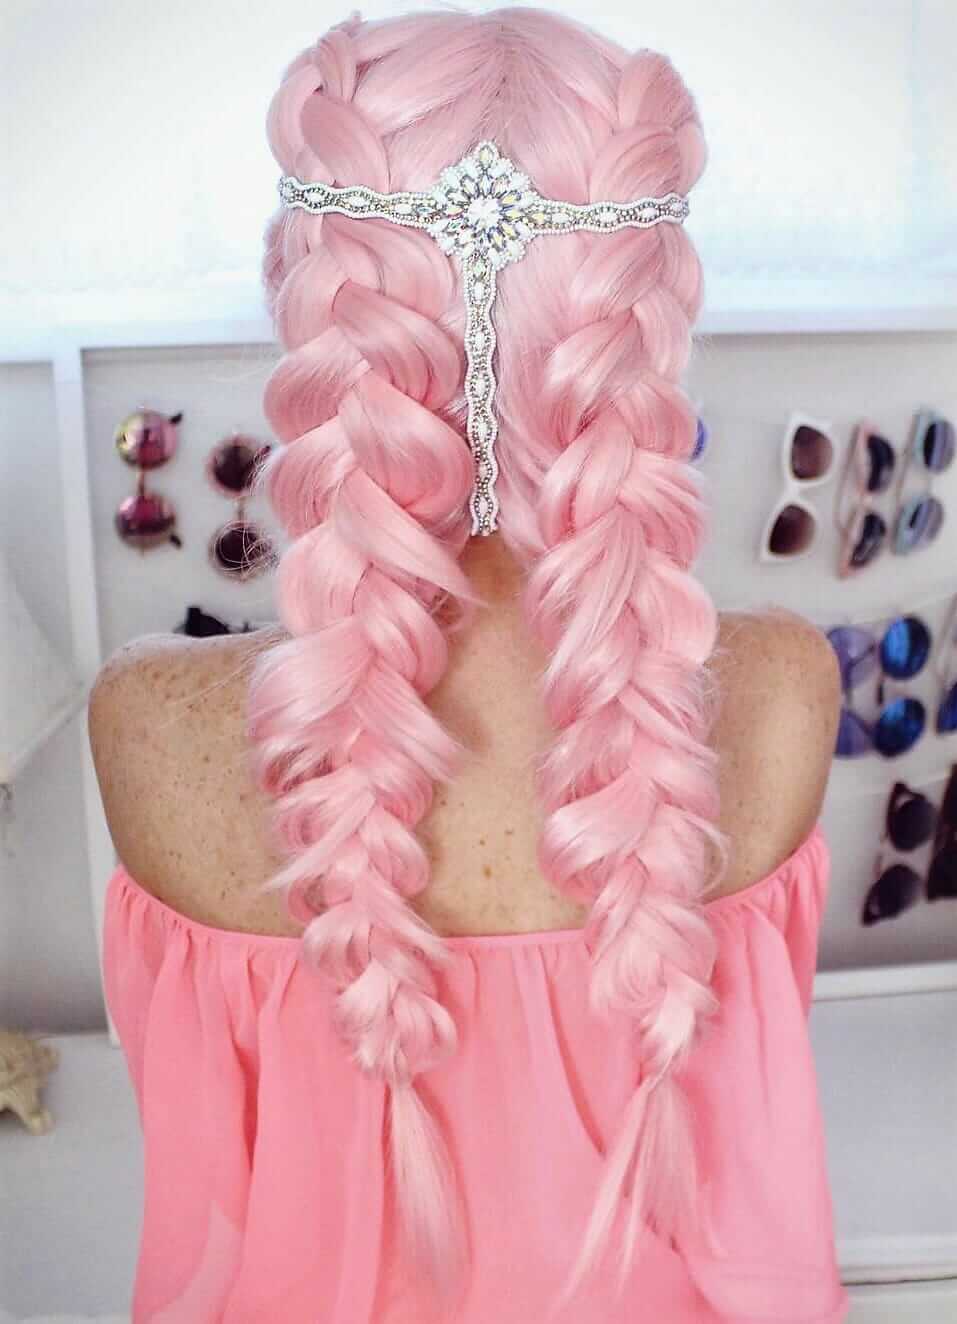 Double braid pastel pink wig by thelittlemua